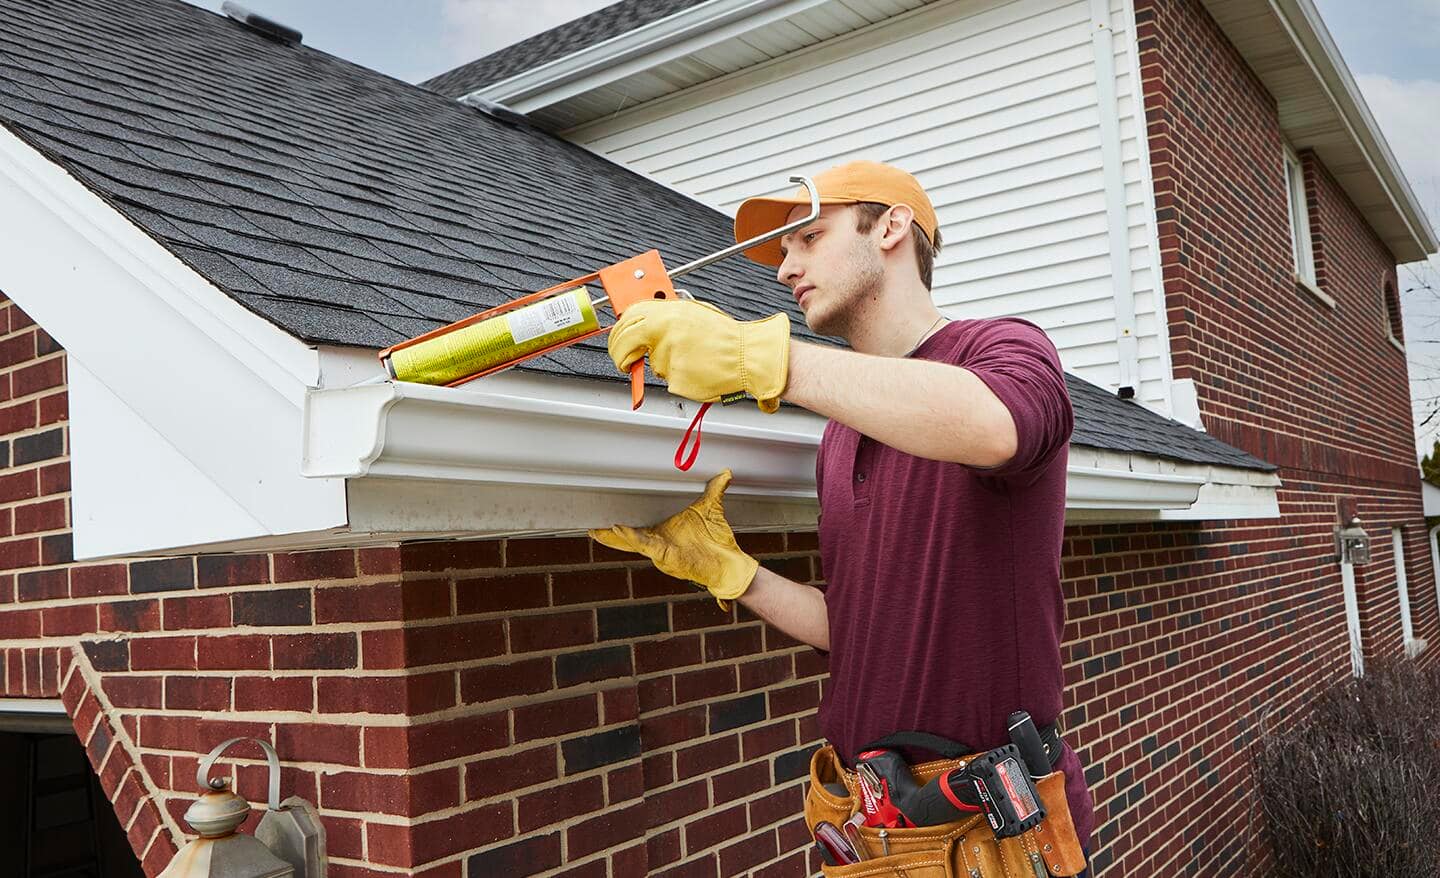 A person applying silicone to seal part of a gutter system.